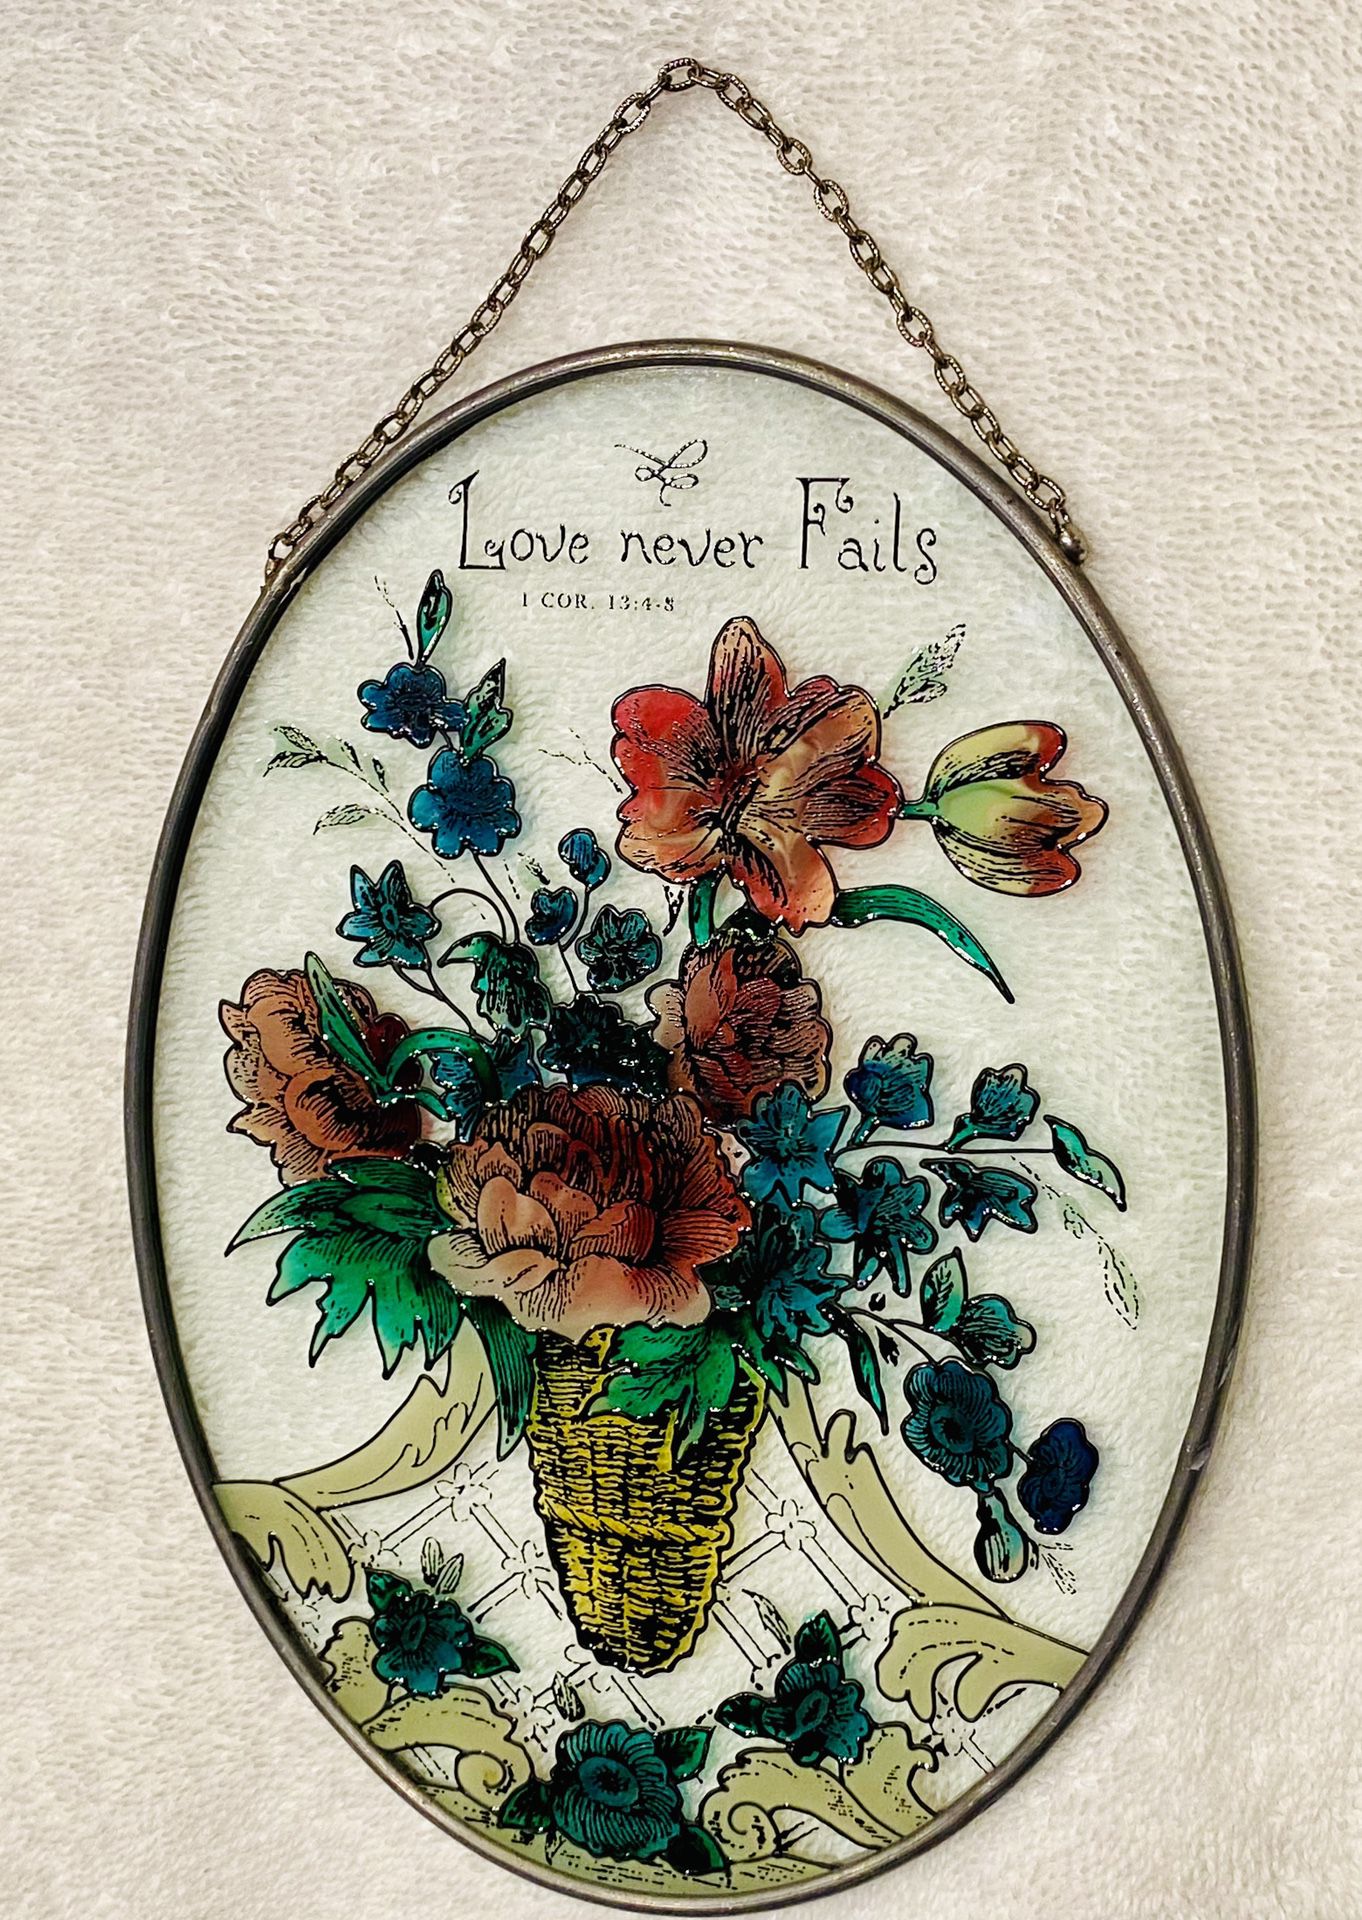 Vintage Stained glass/sun catcher “Love Never Fails”